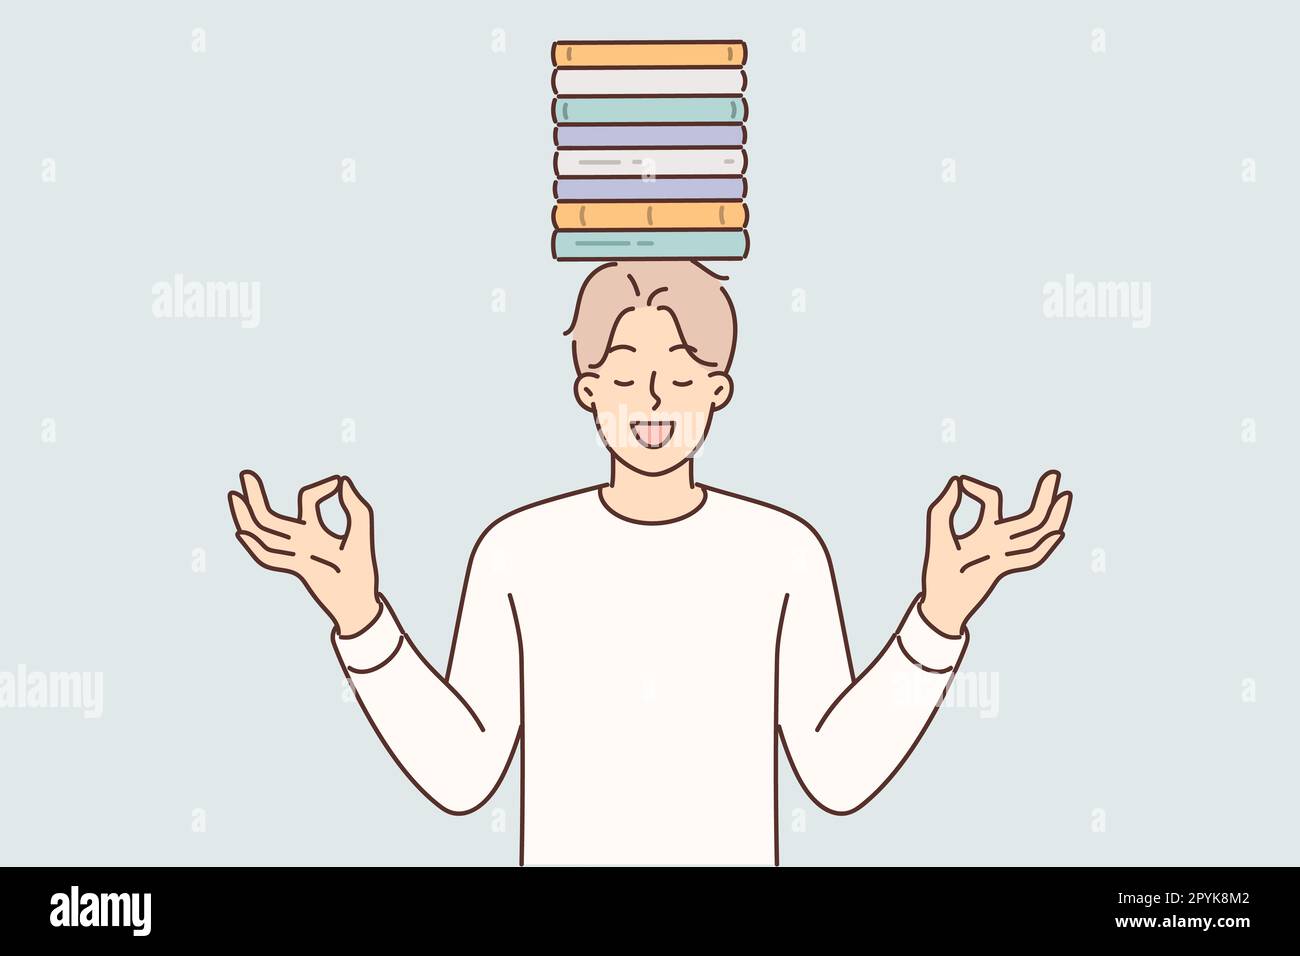 Meditating man with books on head stands with eyes closed trying to maintain balance between study and rest. Young guy student or high school student Stock Photo